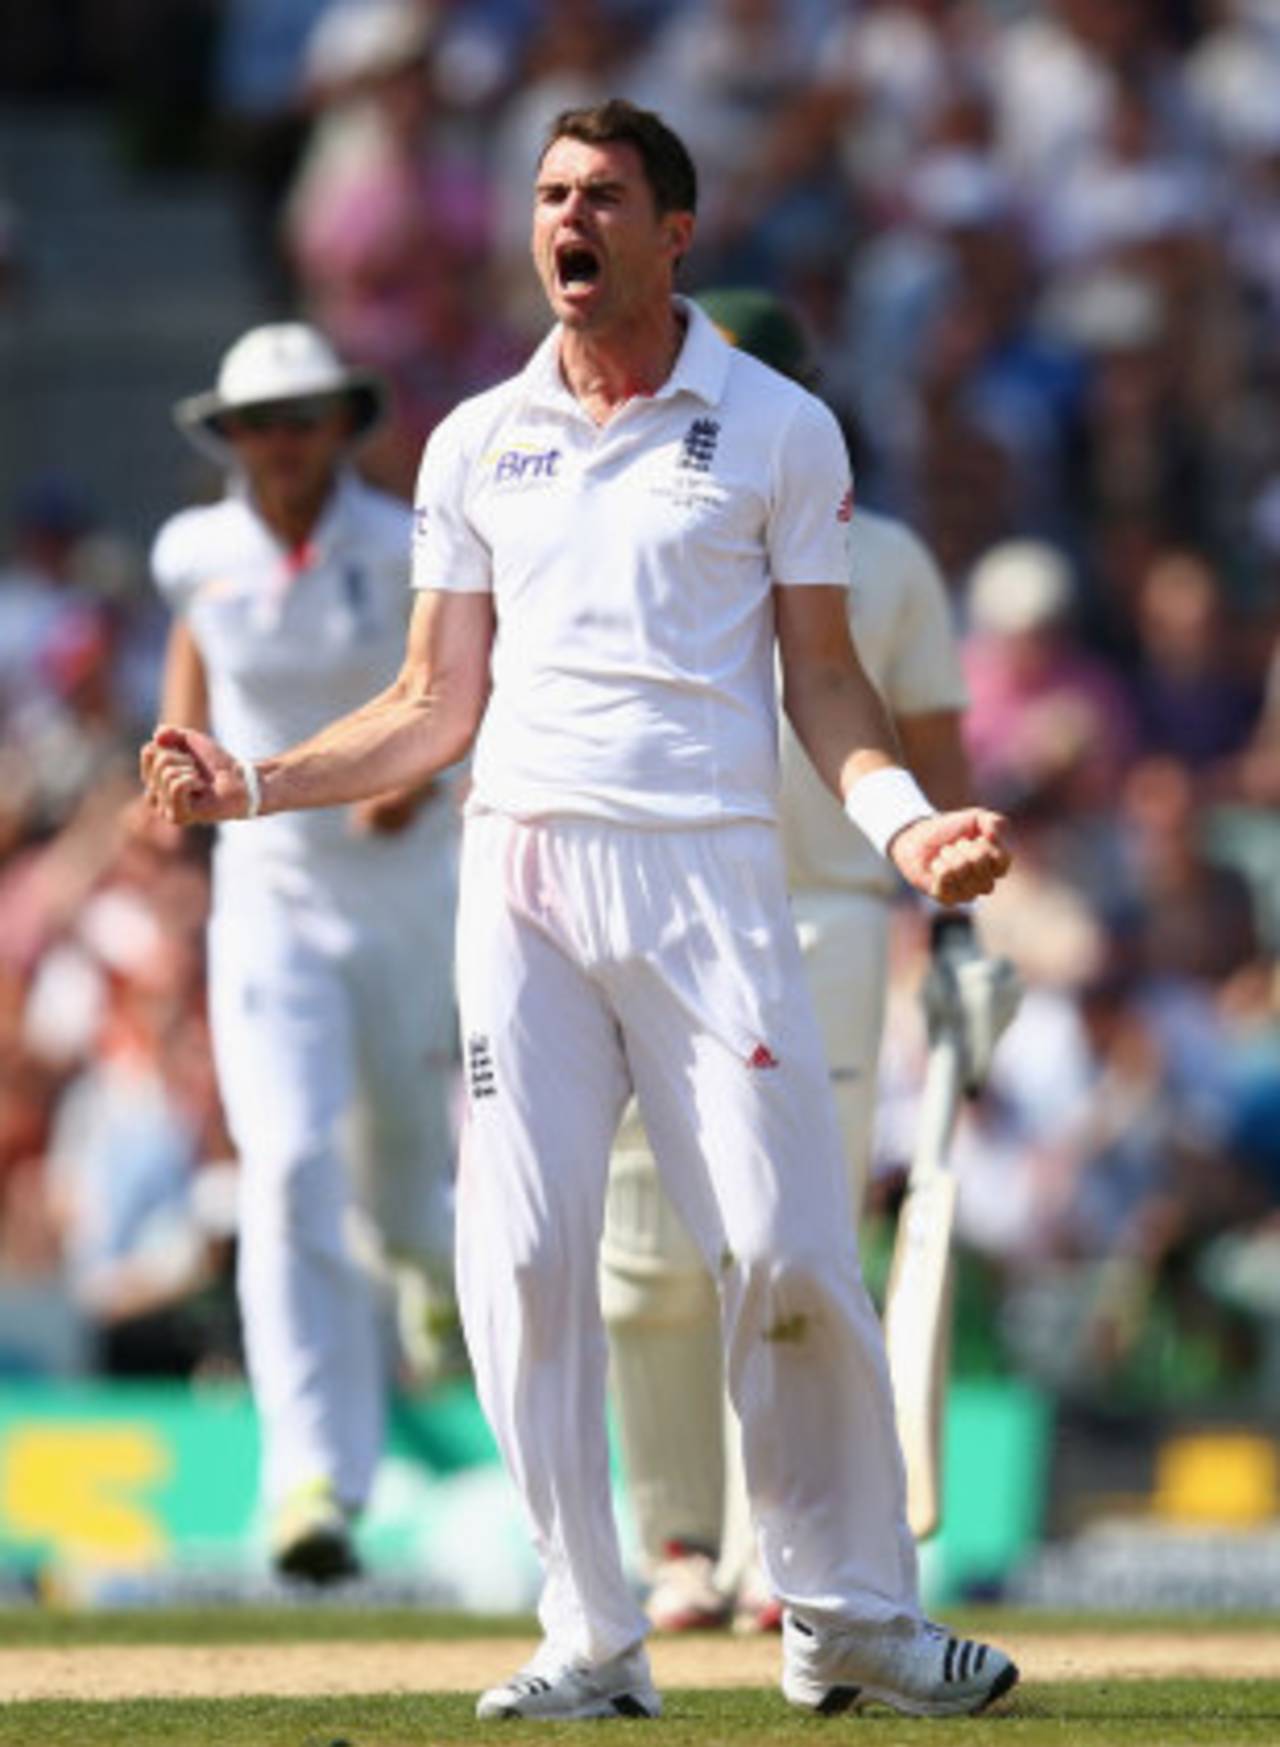 James Anderson roars after dismissing Michael Clarke, England v Australia, 5th Investec Test, The Oval, 1st day, August 21, 2013